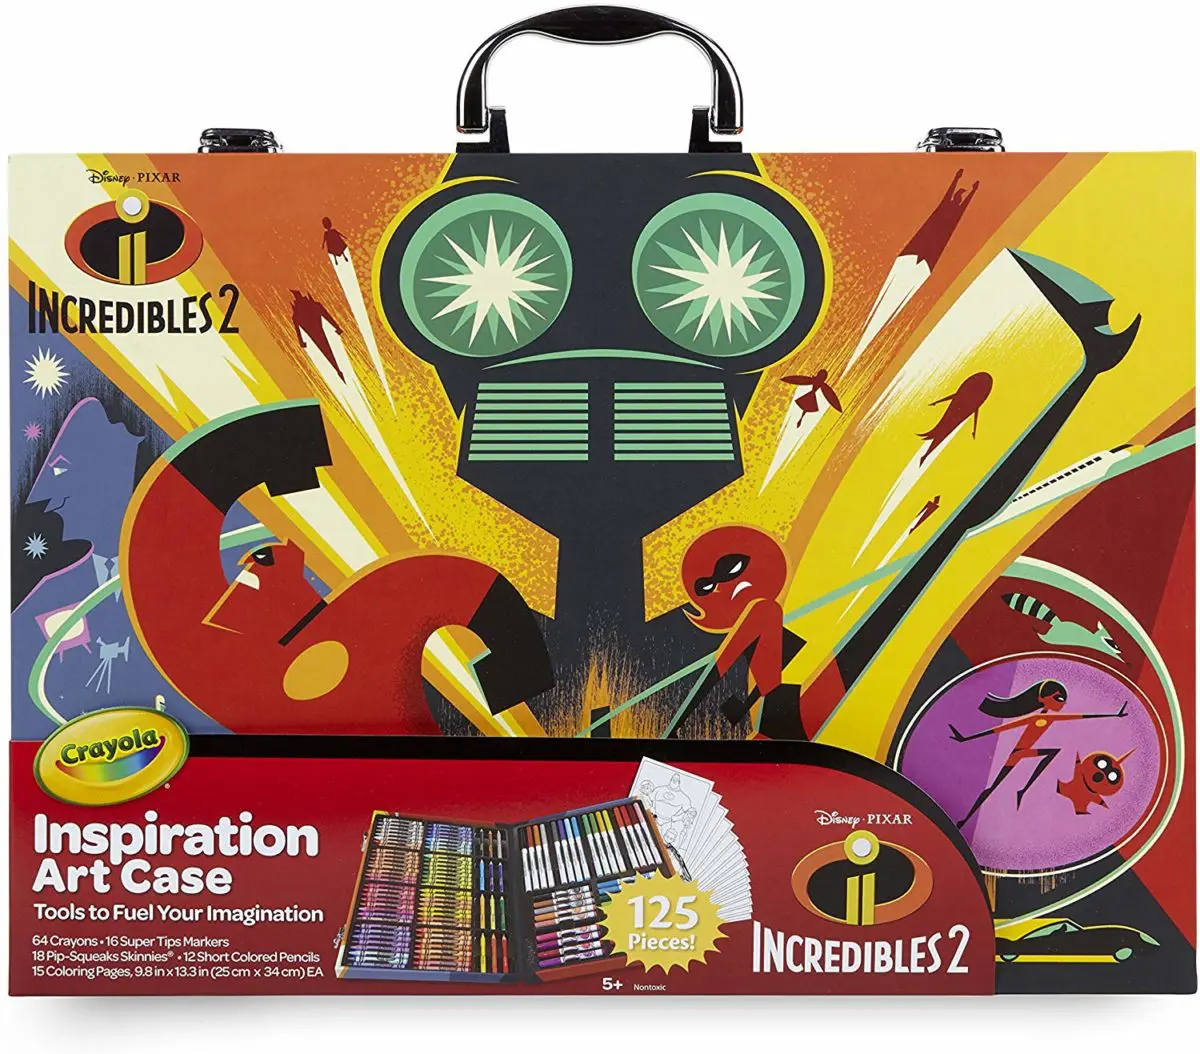 Crayola Disney Pixar Incredible 2 Inspiration Art Case - Top Toys and Gifts for Six Year Old Boys 1